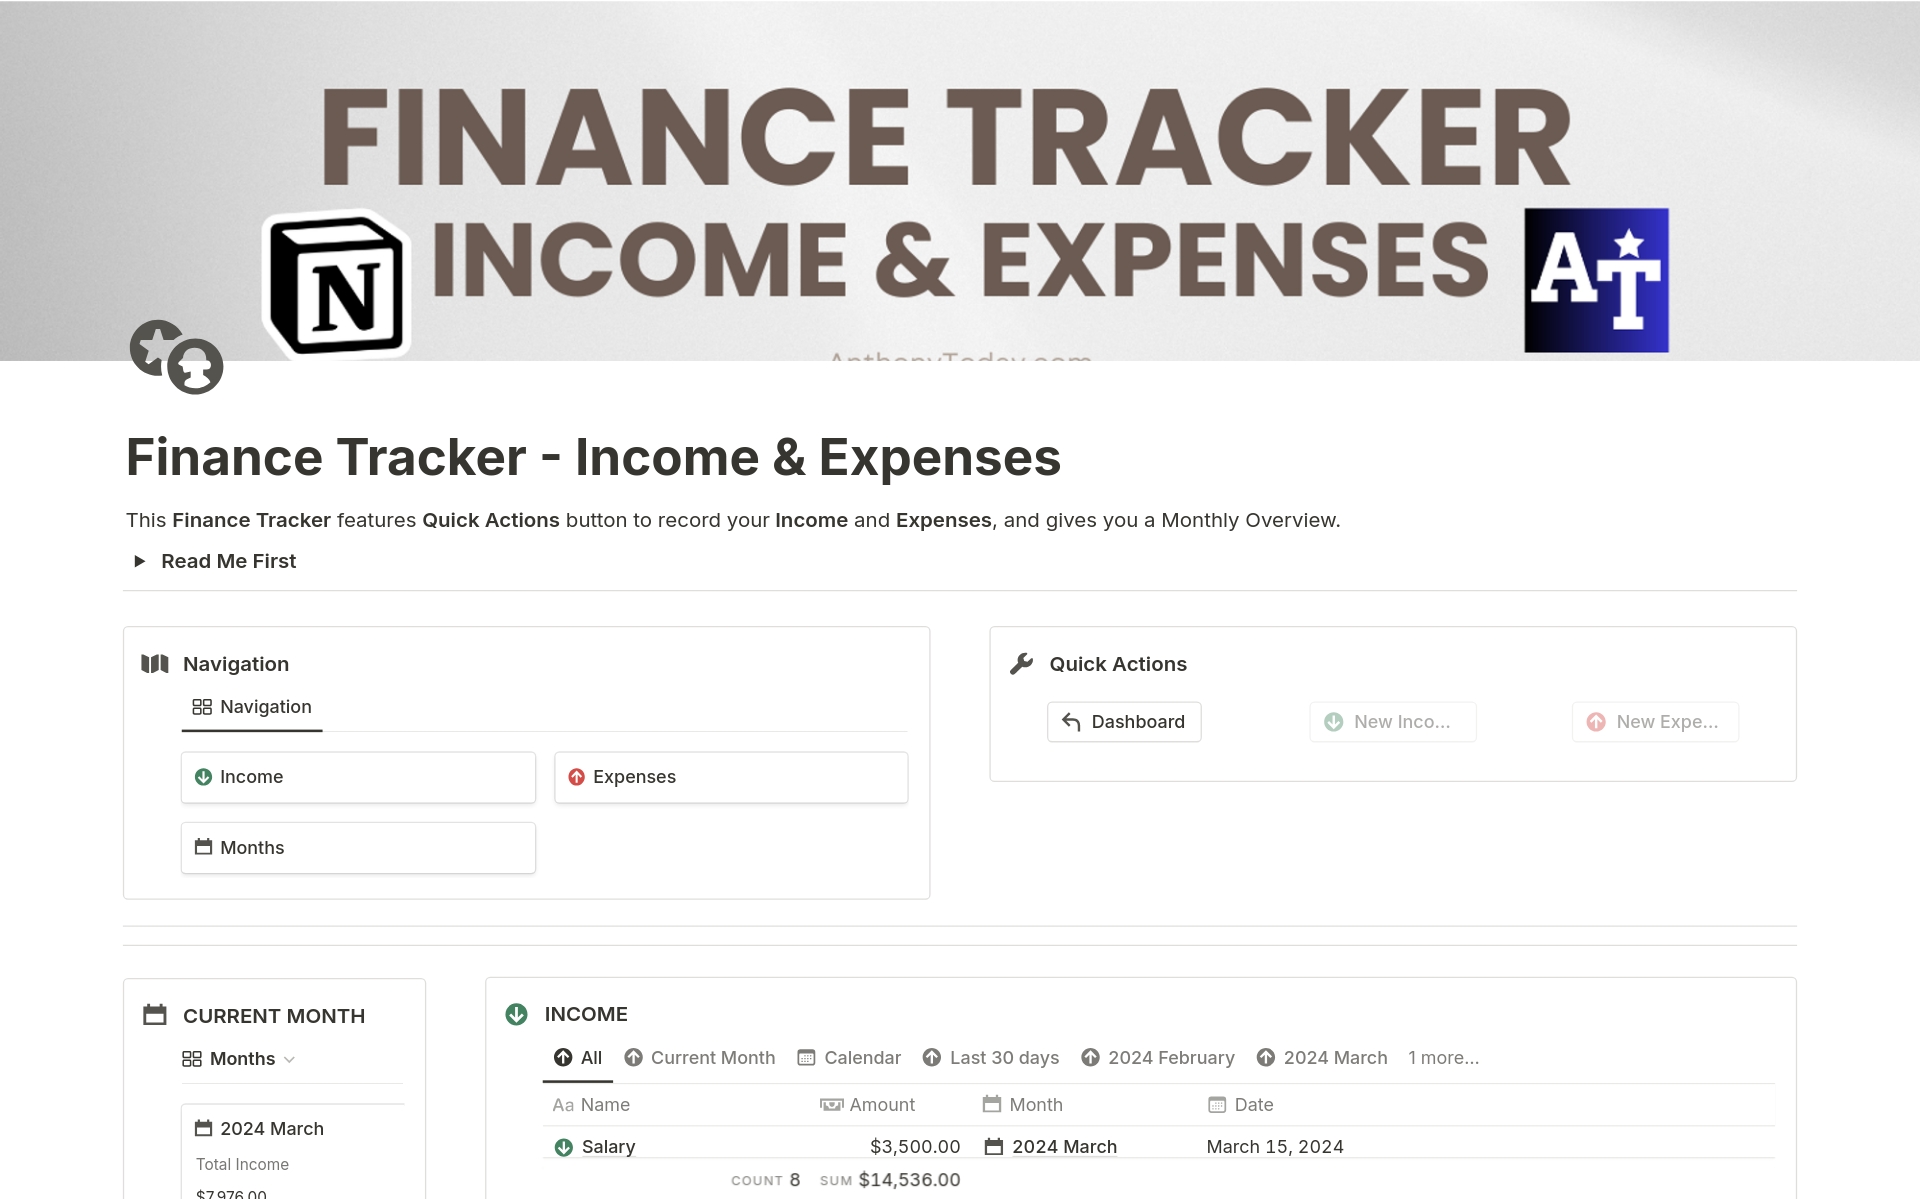 This Finance Tracker features Quick Actions buttons to record your Income and Expenses and gives you a Monthly Overview.